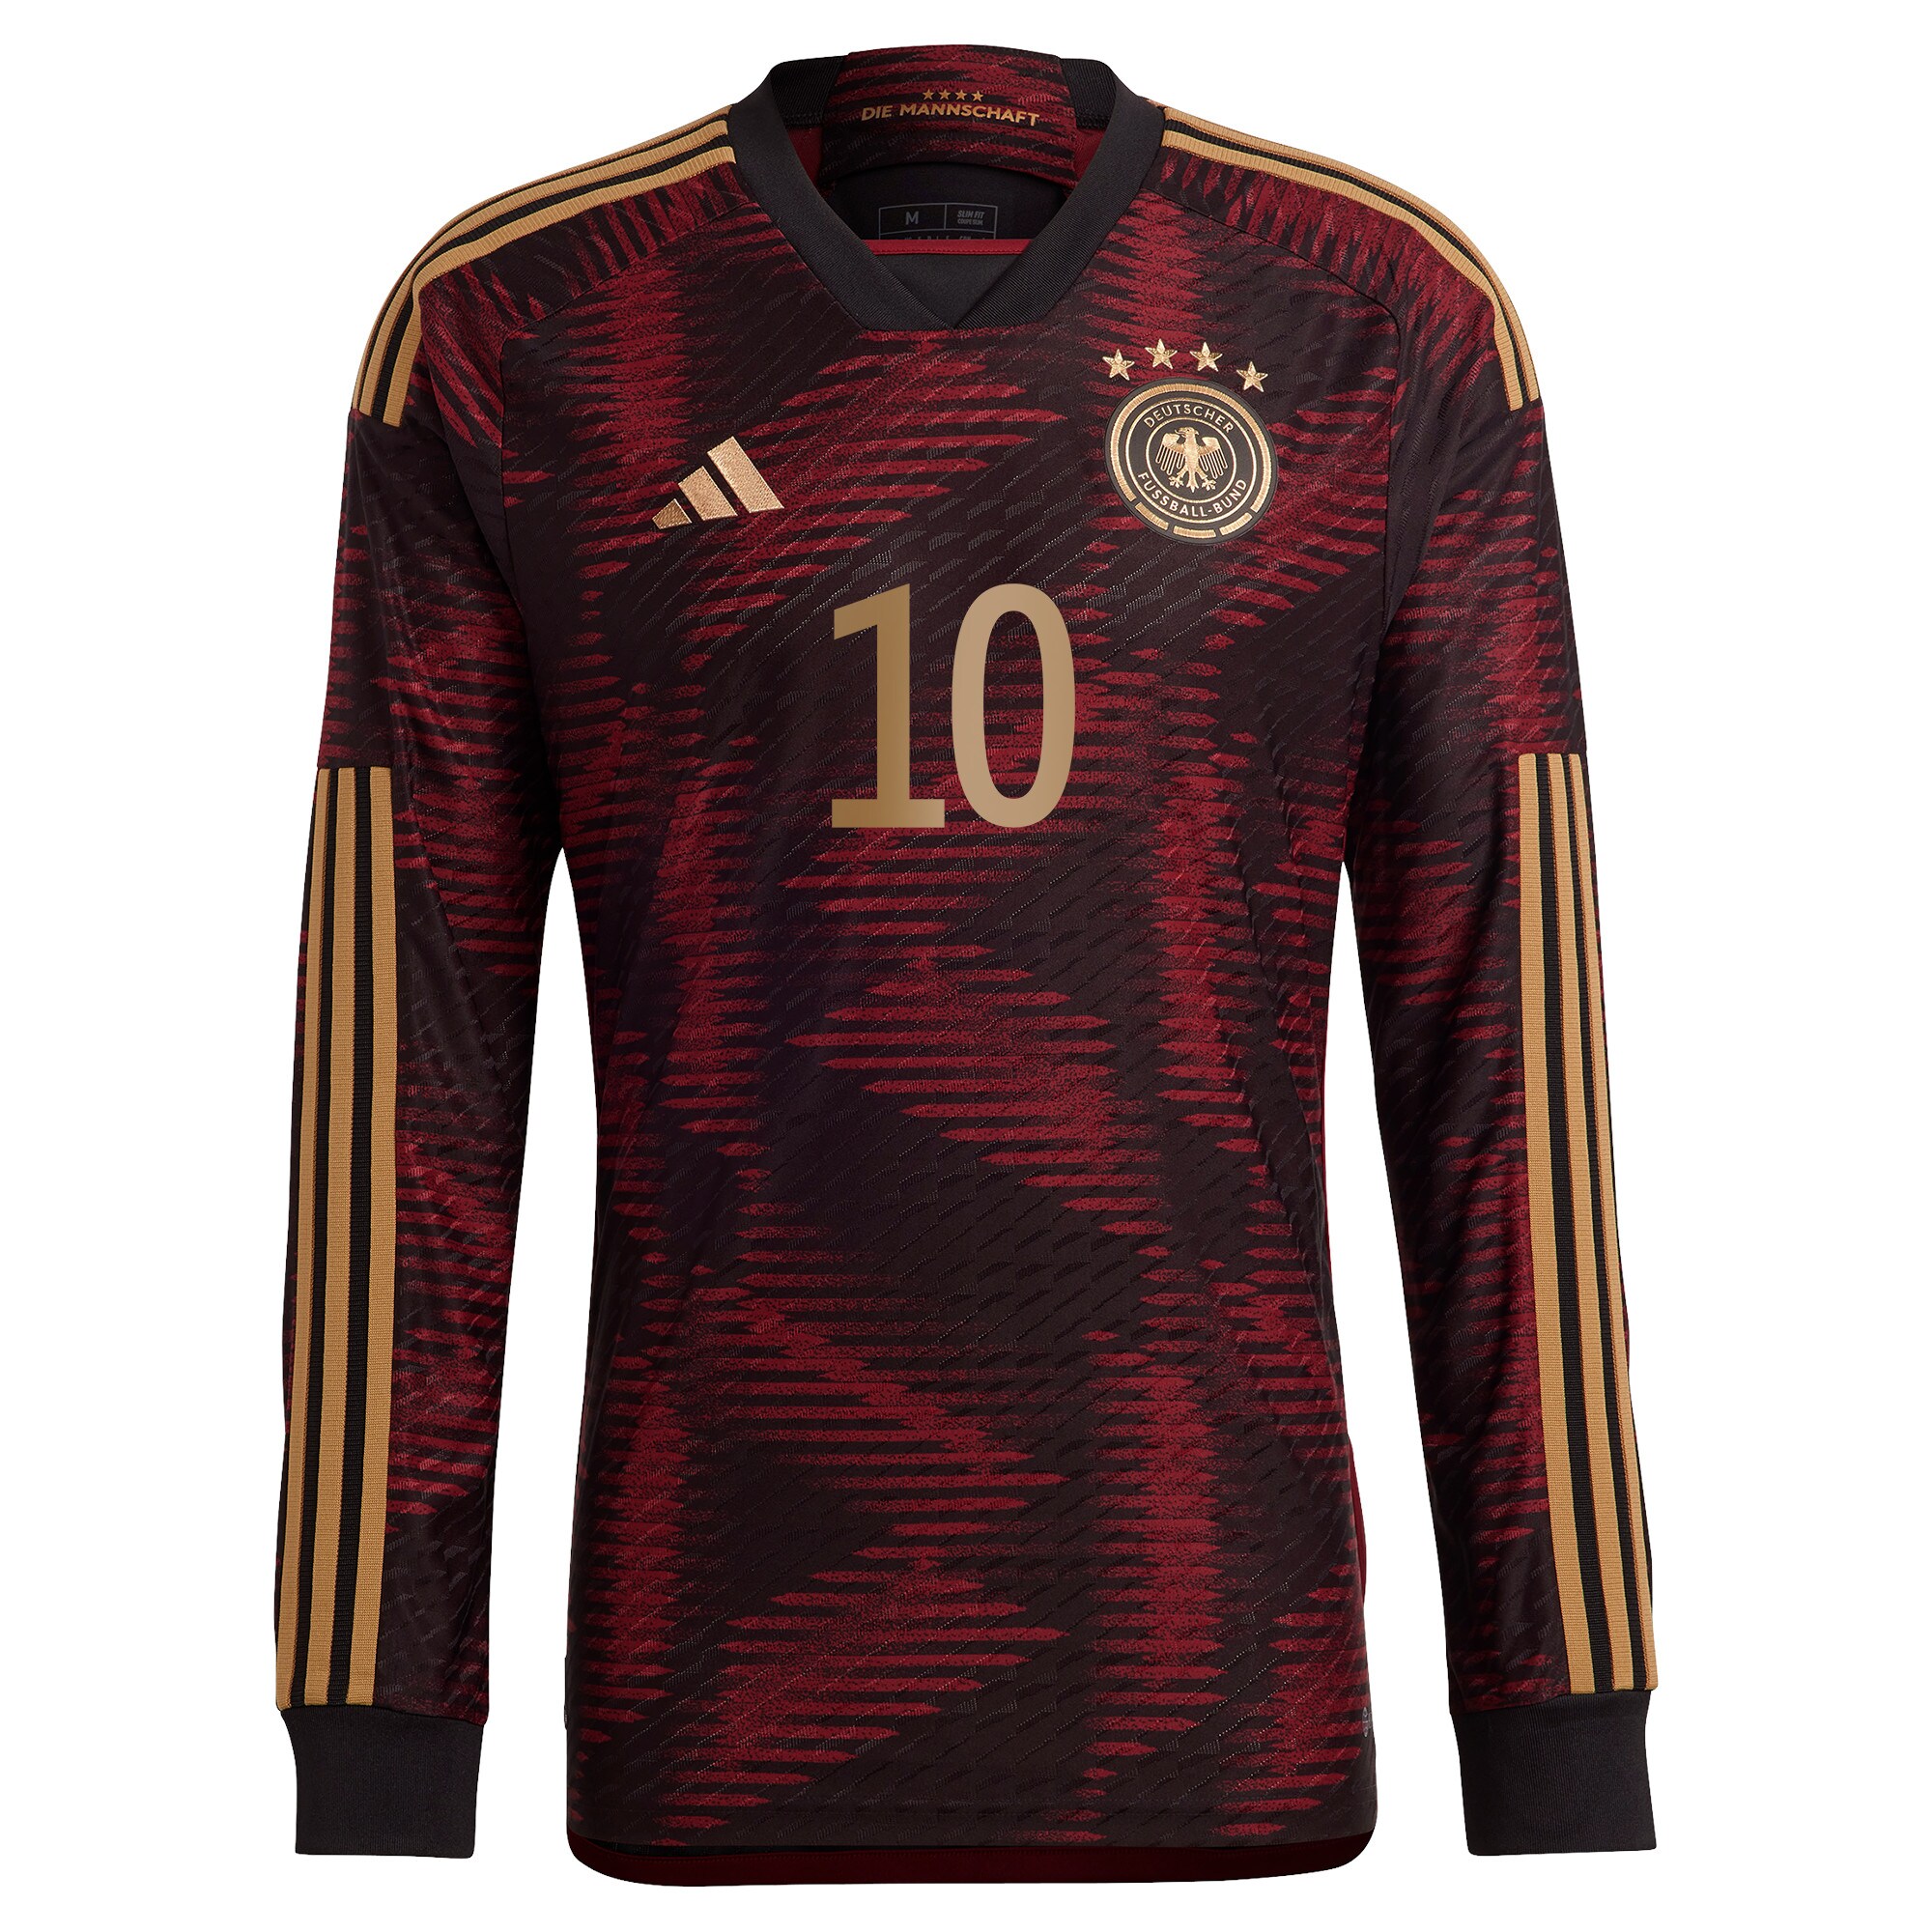 Germany Away Authentic Shirt Long Sleeve with Gnabry 10 printing